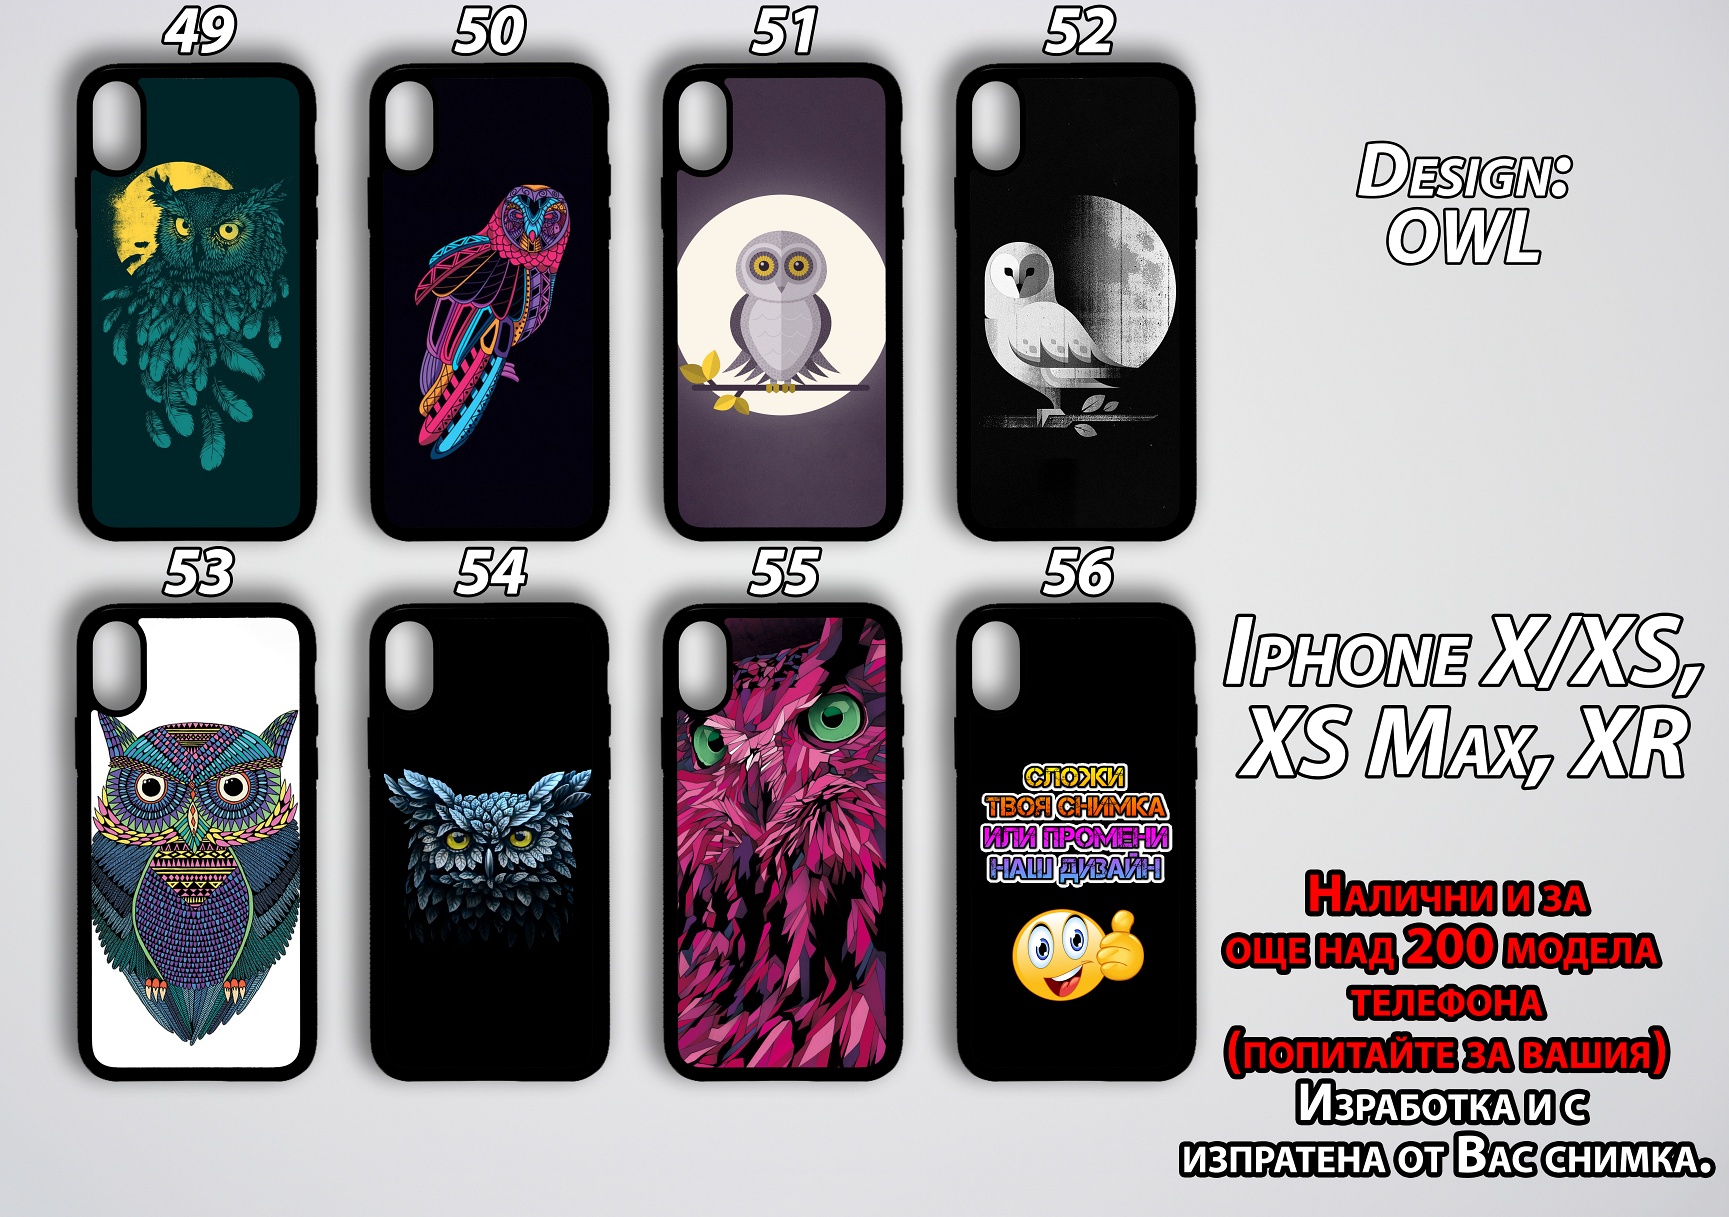 mobile phone cases Owl 49